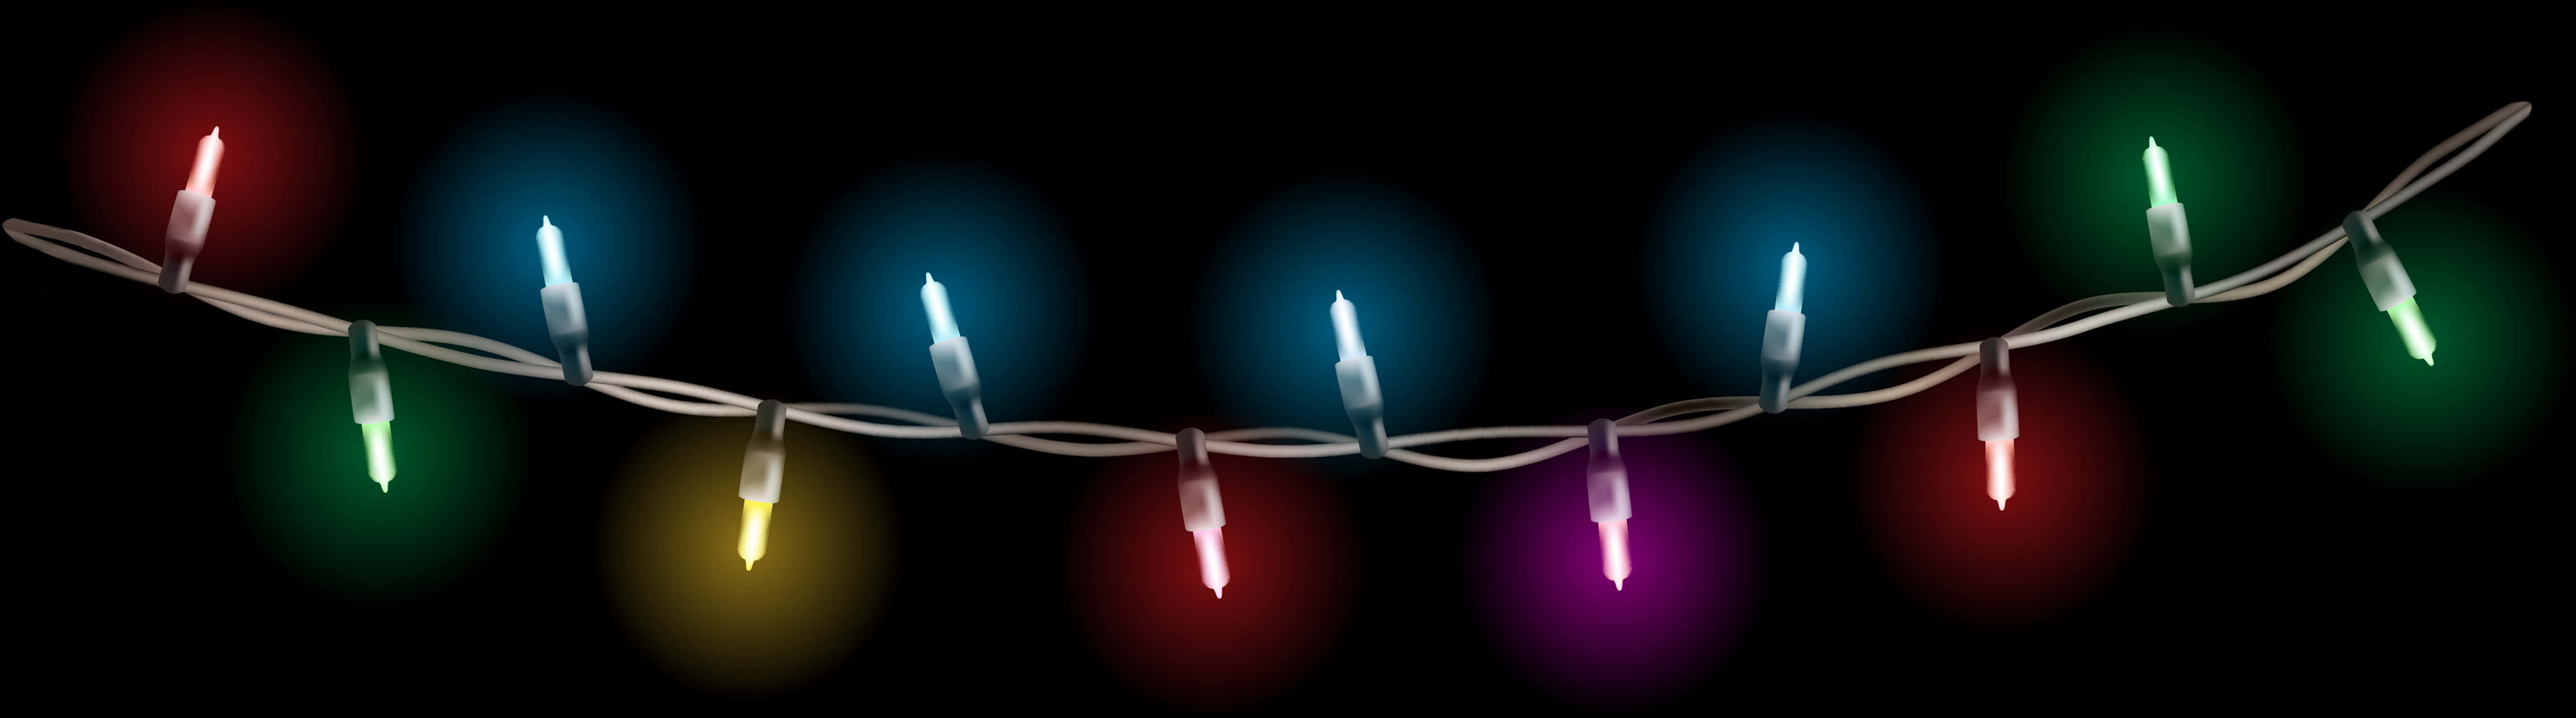 A String Of Lights With Different Colors